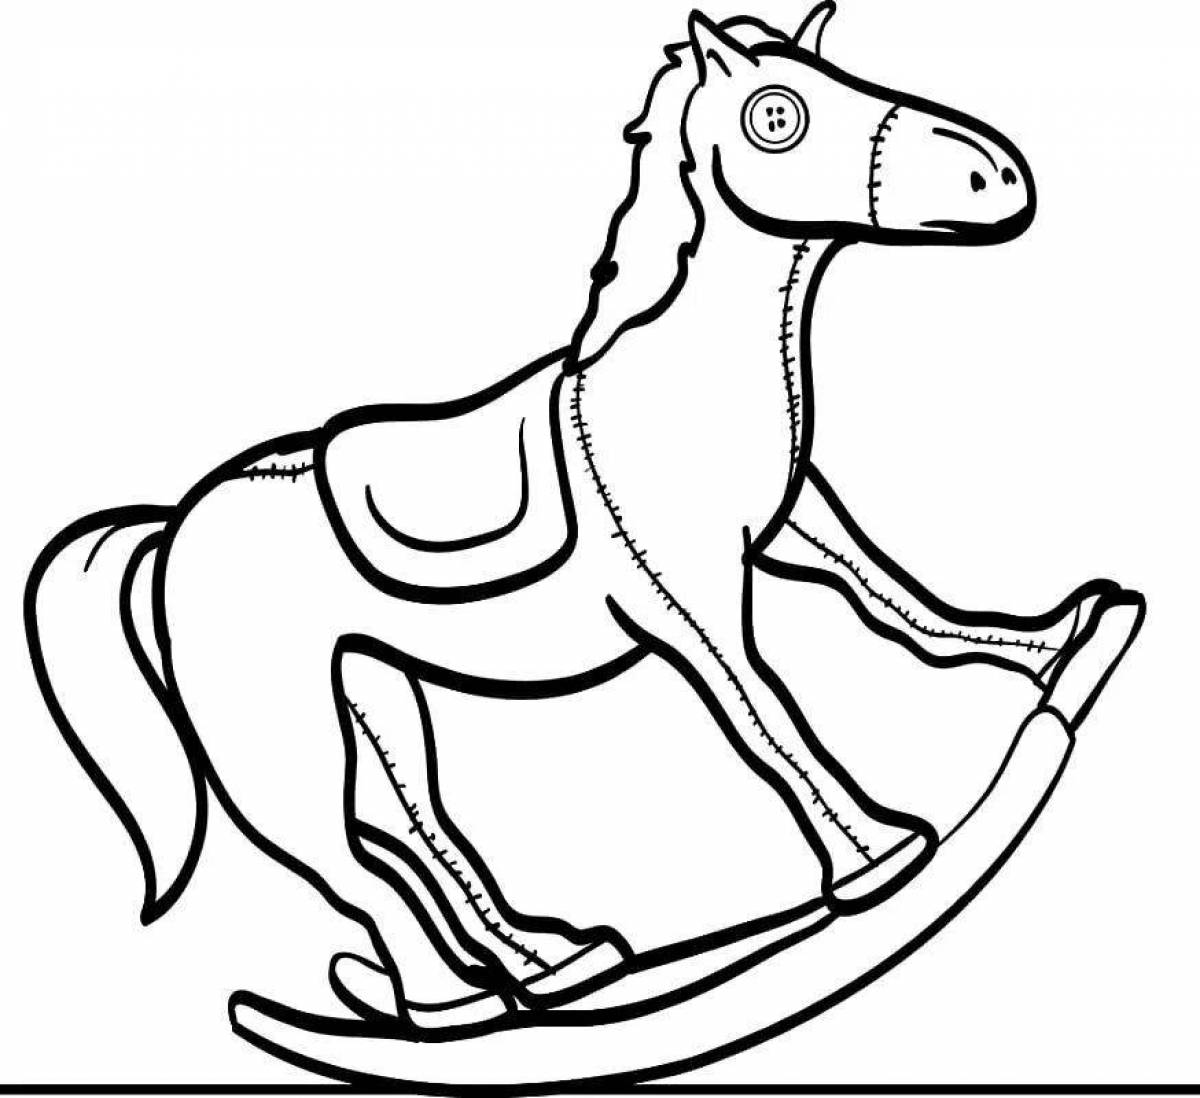 Shiny rocking horse coloring book